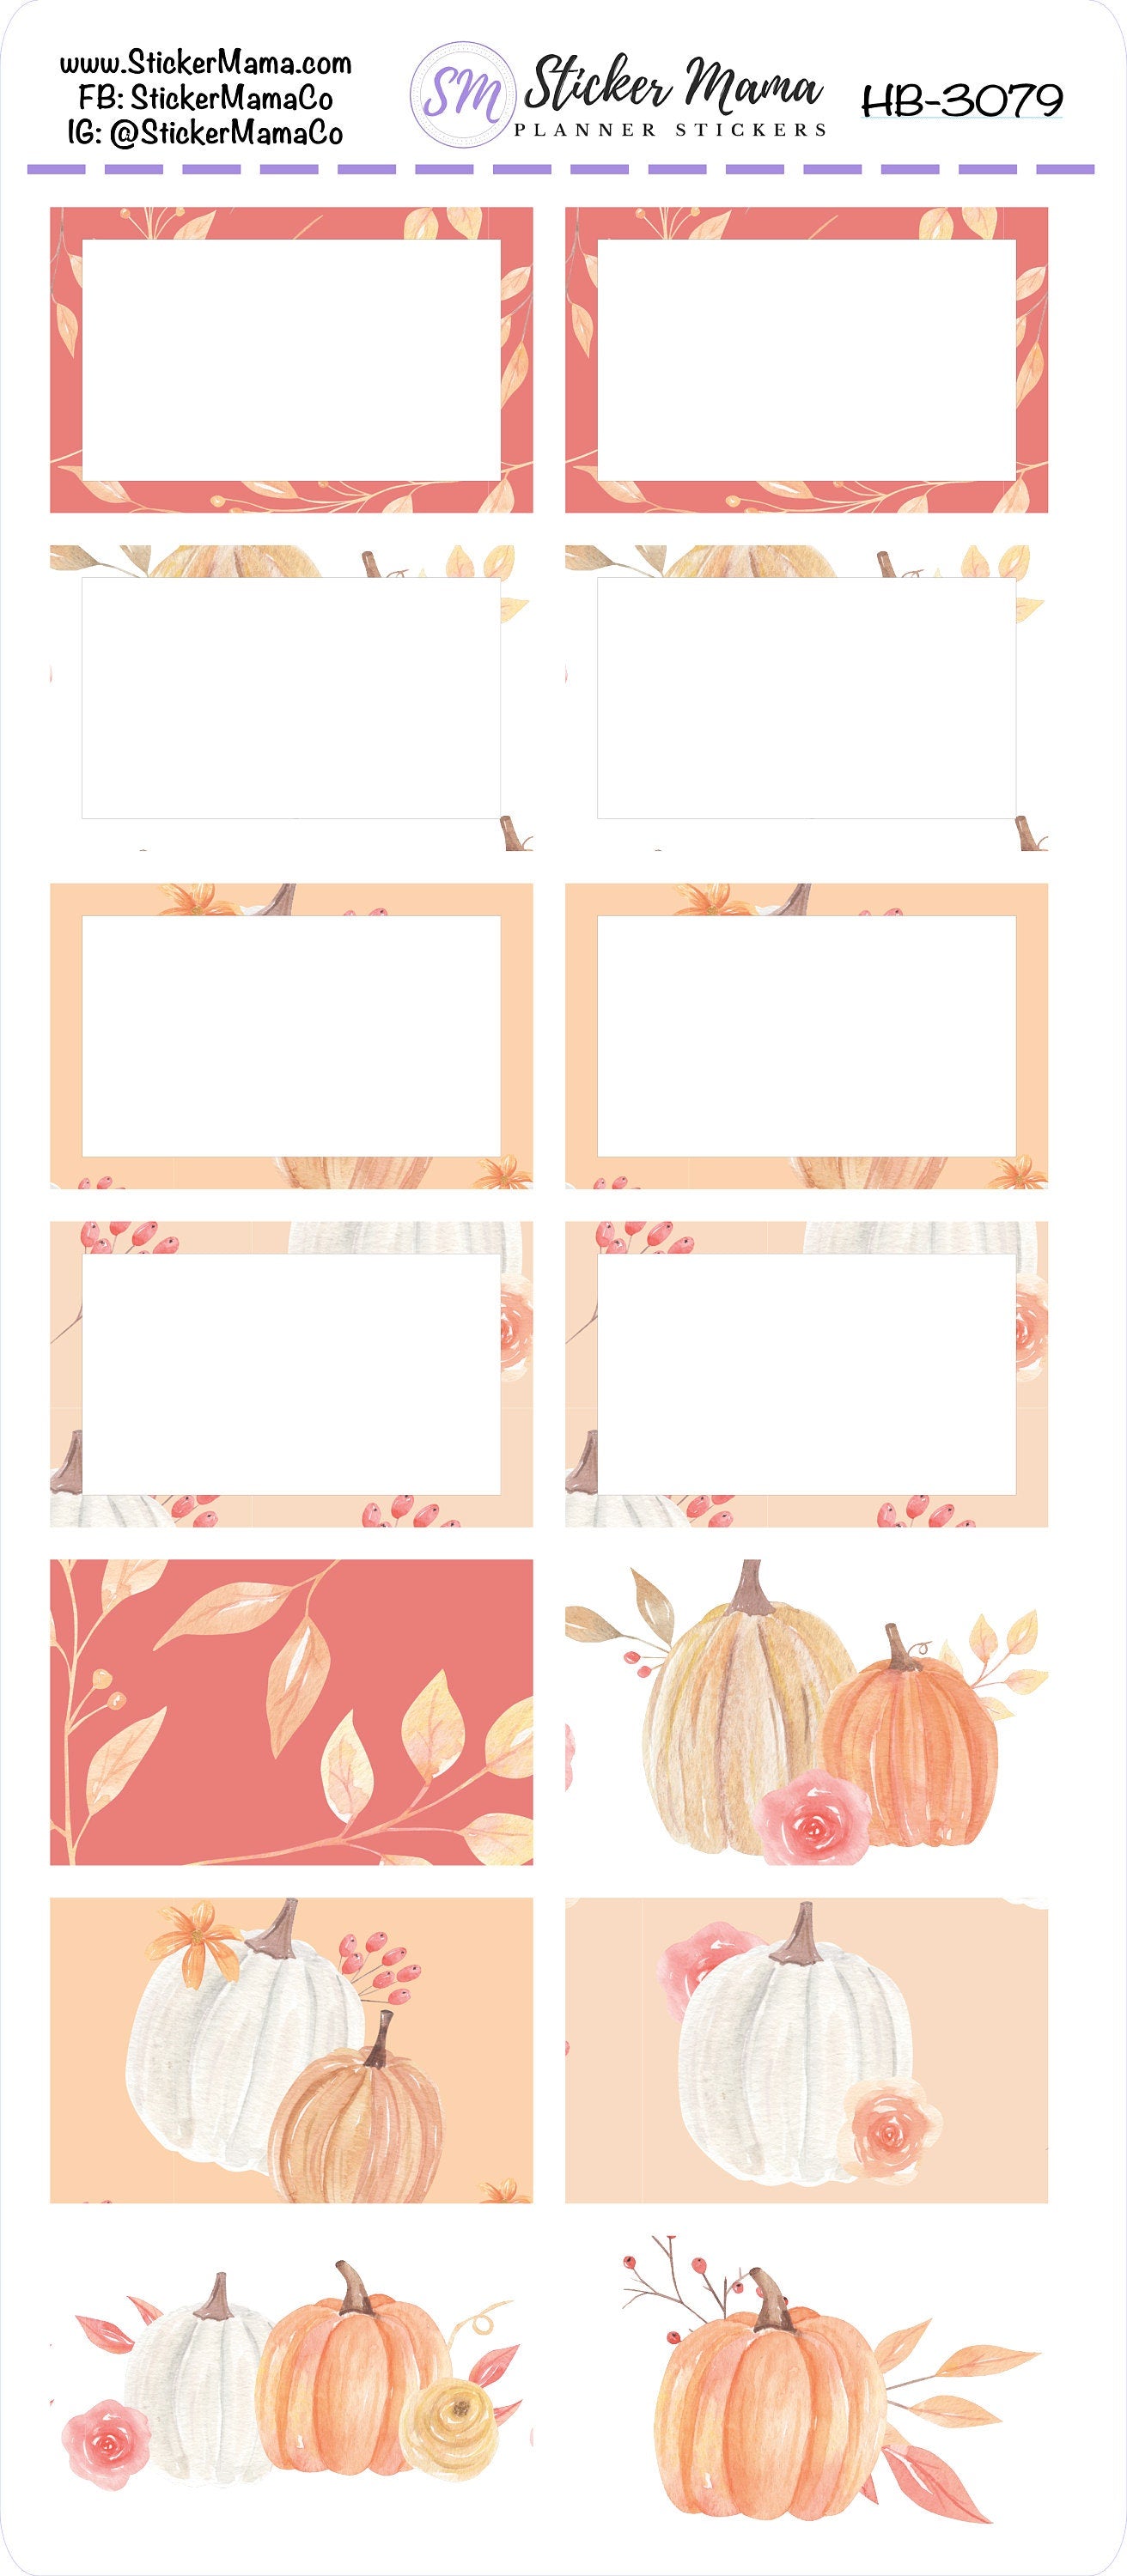 BL-3079 - HB-3079 BASIC Label Stickers - Pumpkins October Stickers - Half Boxes - Planner Stickers - Full Box for Planners